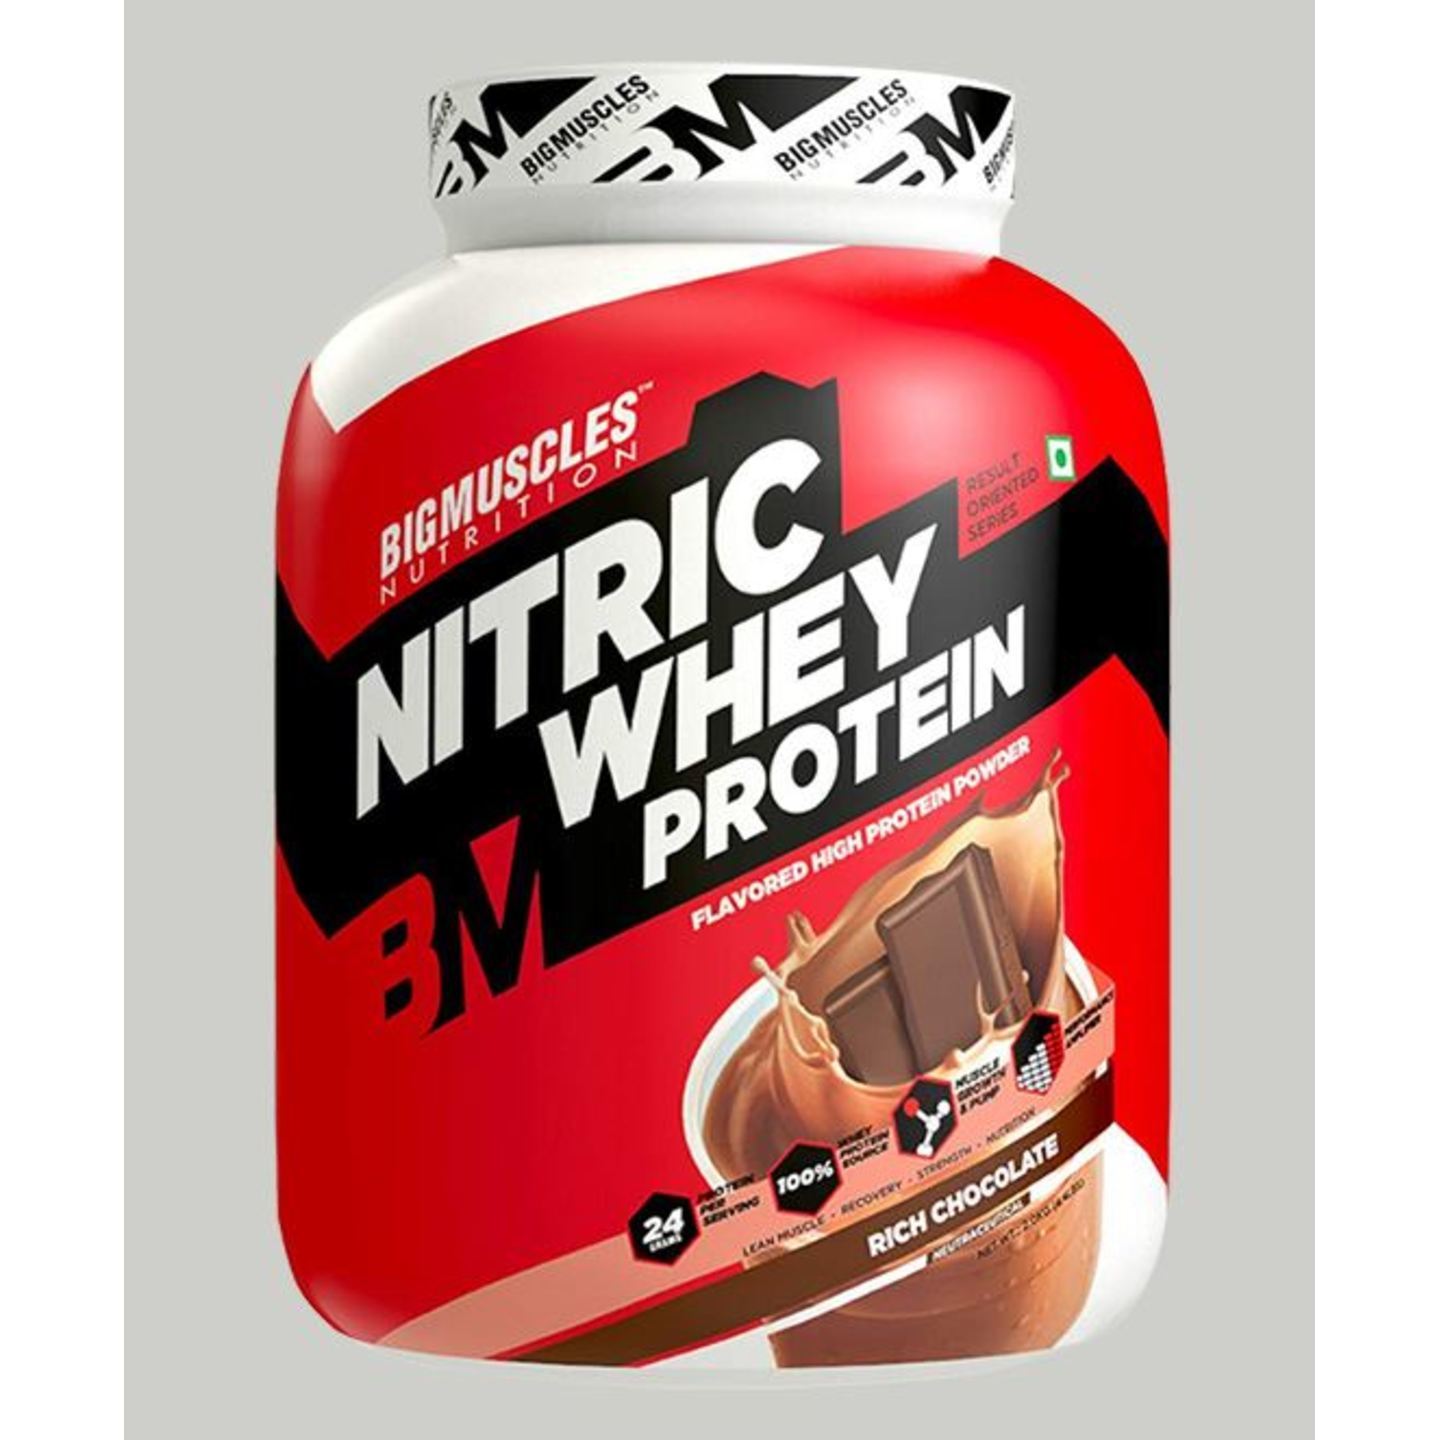 MastMart Bigmuscles Nutrition Nitric Whey Protein Rich Chocolate 4.4 lbs